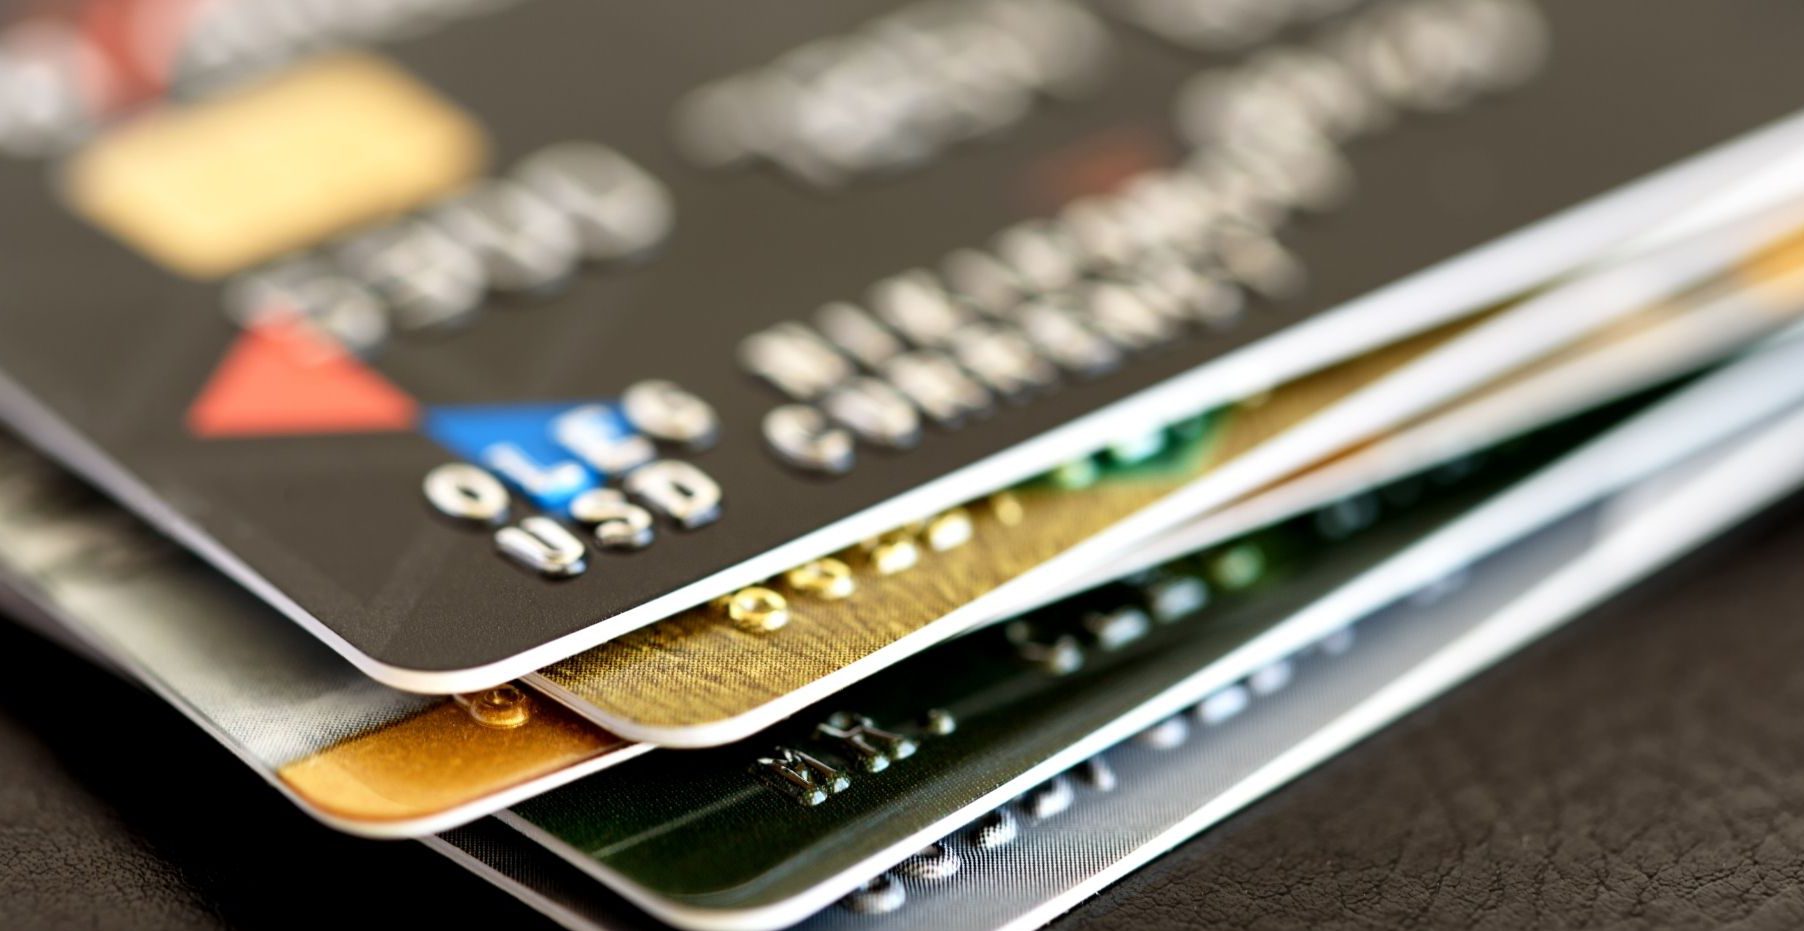 Global Debit Card Market Overview And Prospects